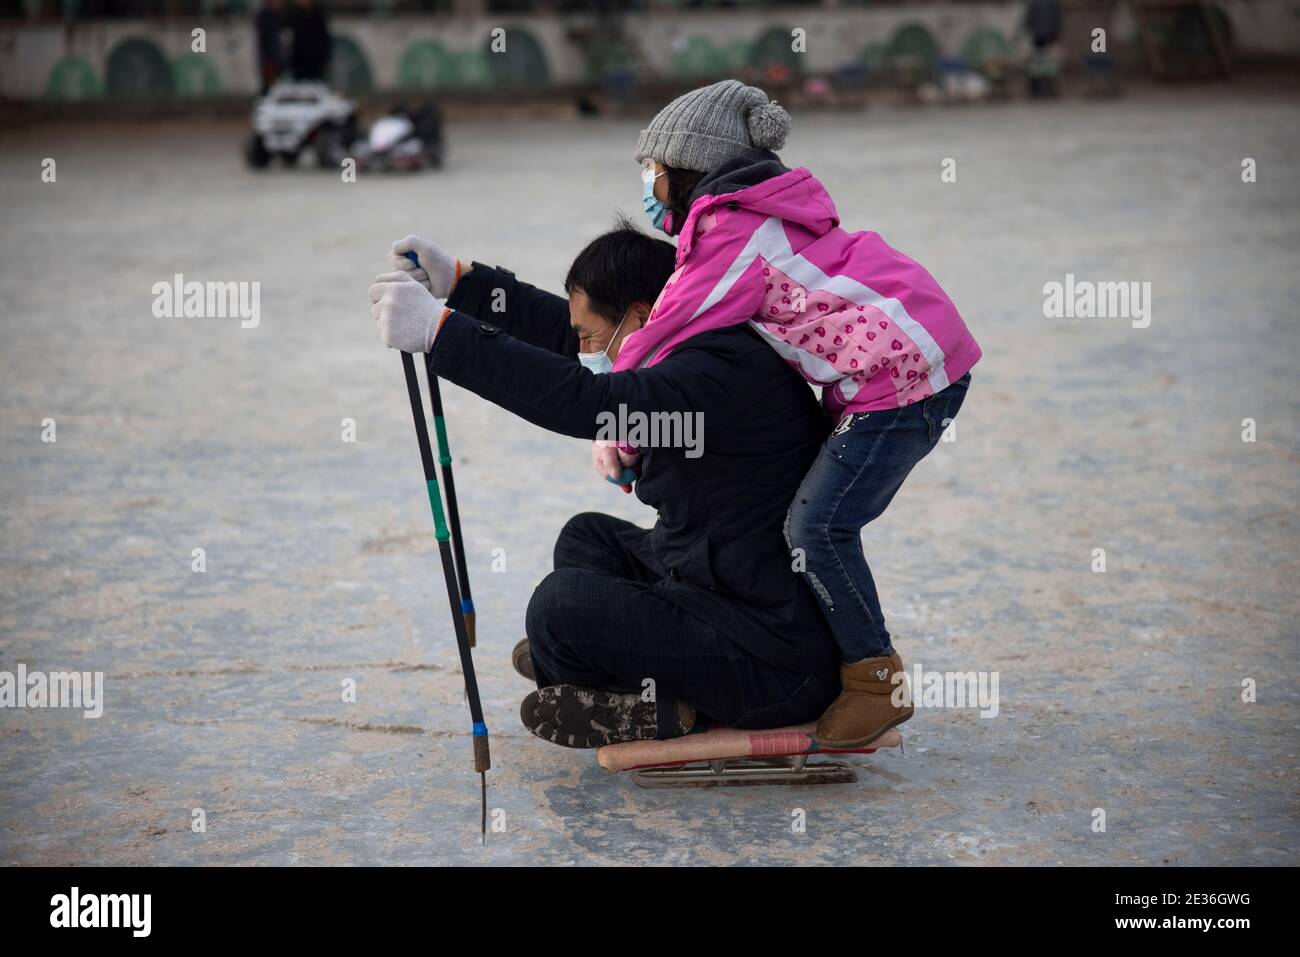 Citizens come to the park to skate and enjoy the joy brought by sports after skating rinks reopen in Shenyang city, northeast China's Liaoning provinc Stock Photo